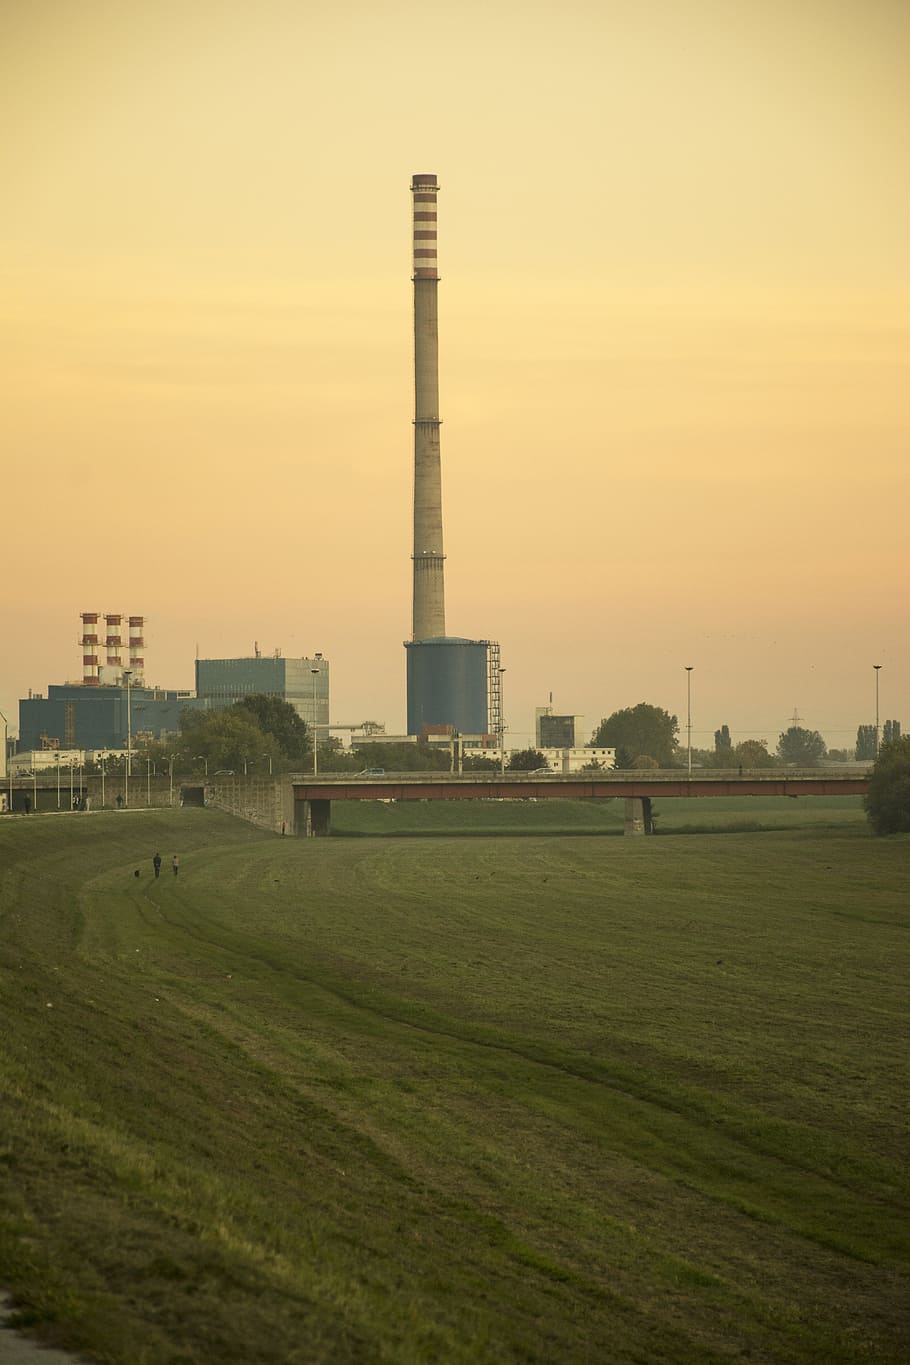 zagreb, power plant, industrial, industry, pollution, power, production, landscape, energy, sky